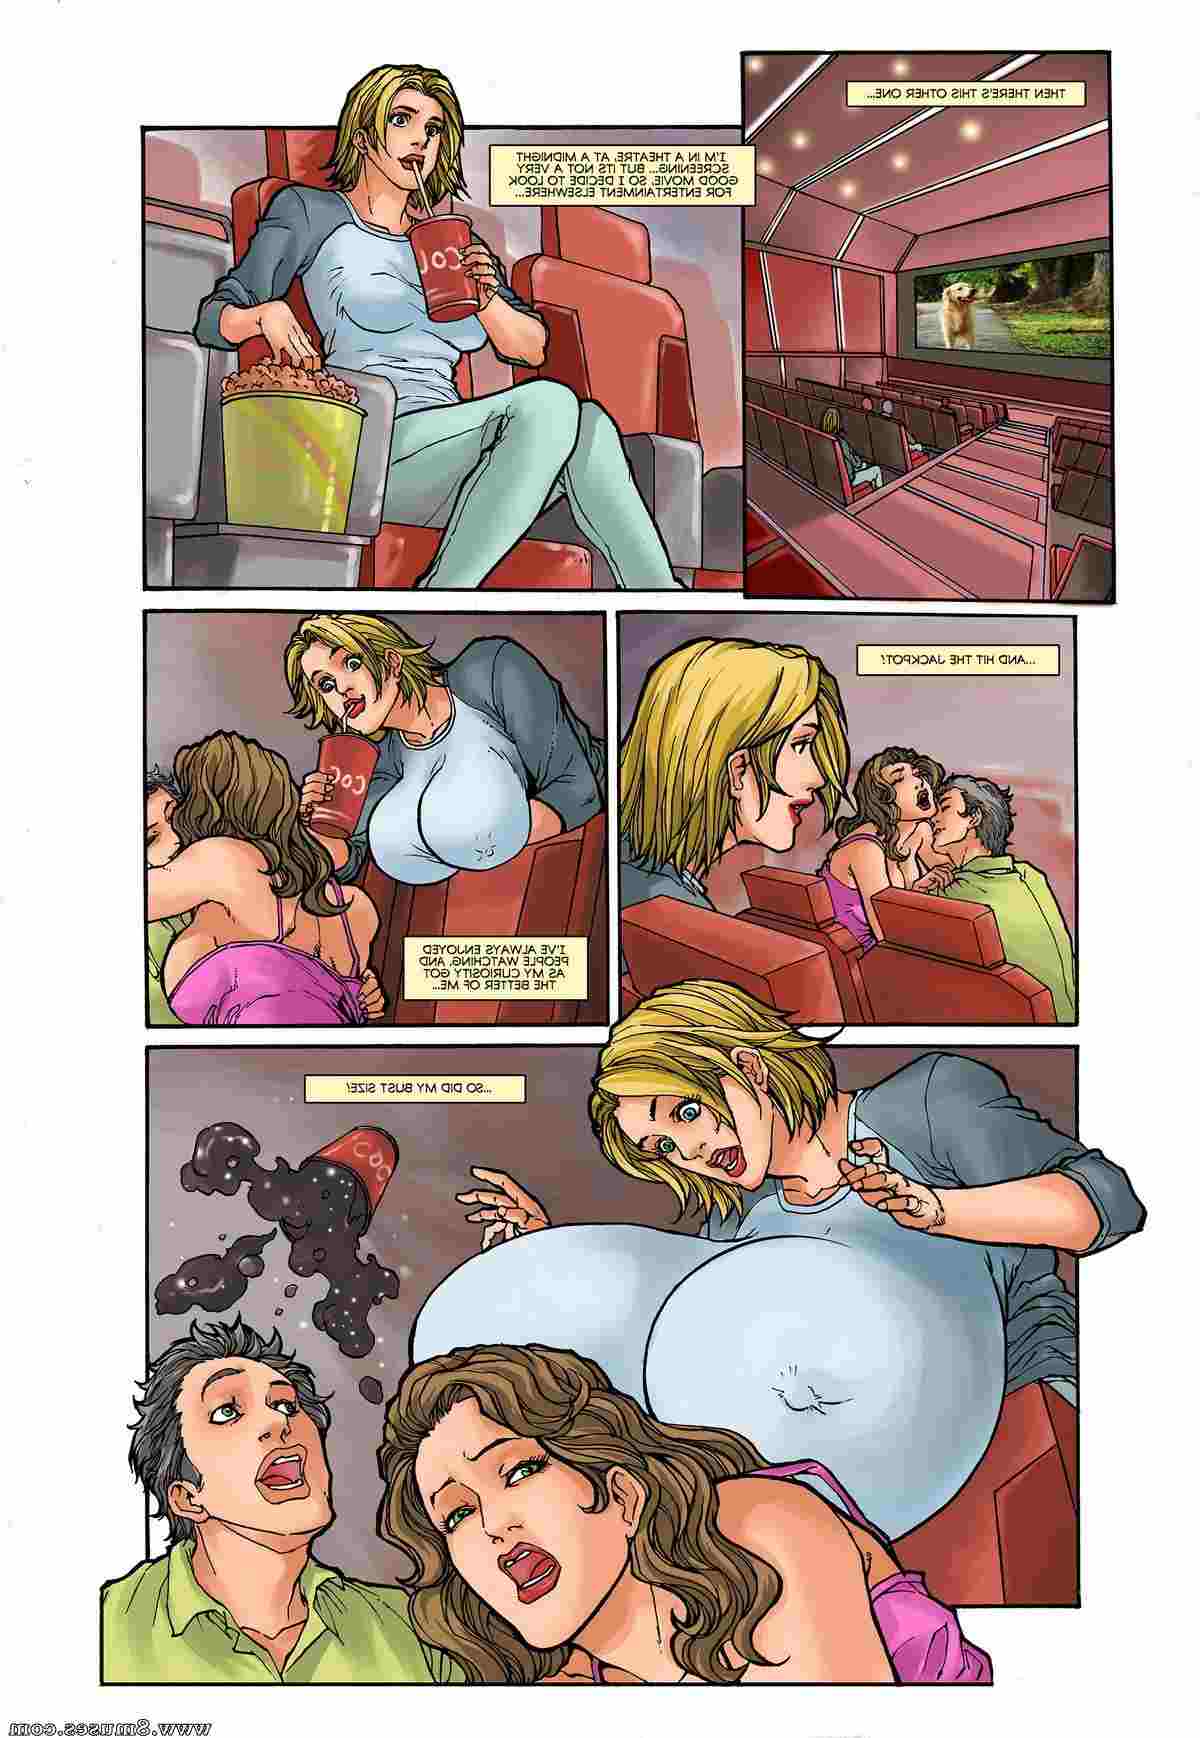 Expansionfan-Comics/Nightmares Nightmares__8muses_-_Sex_and_Porn_Comics_11.jpg